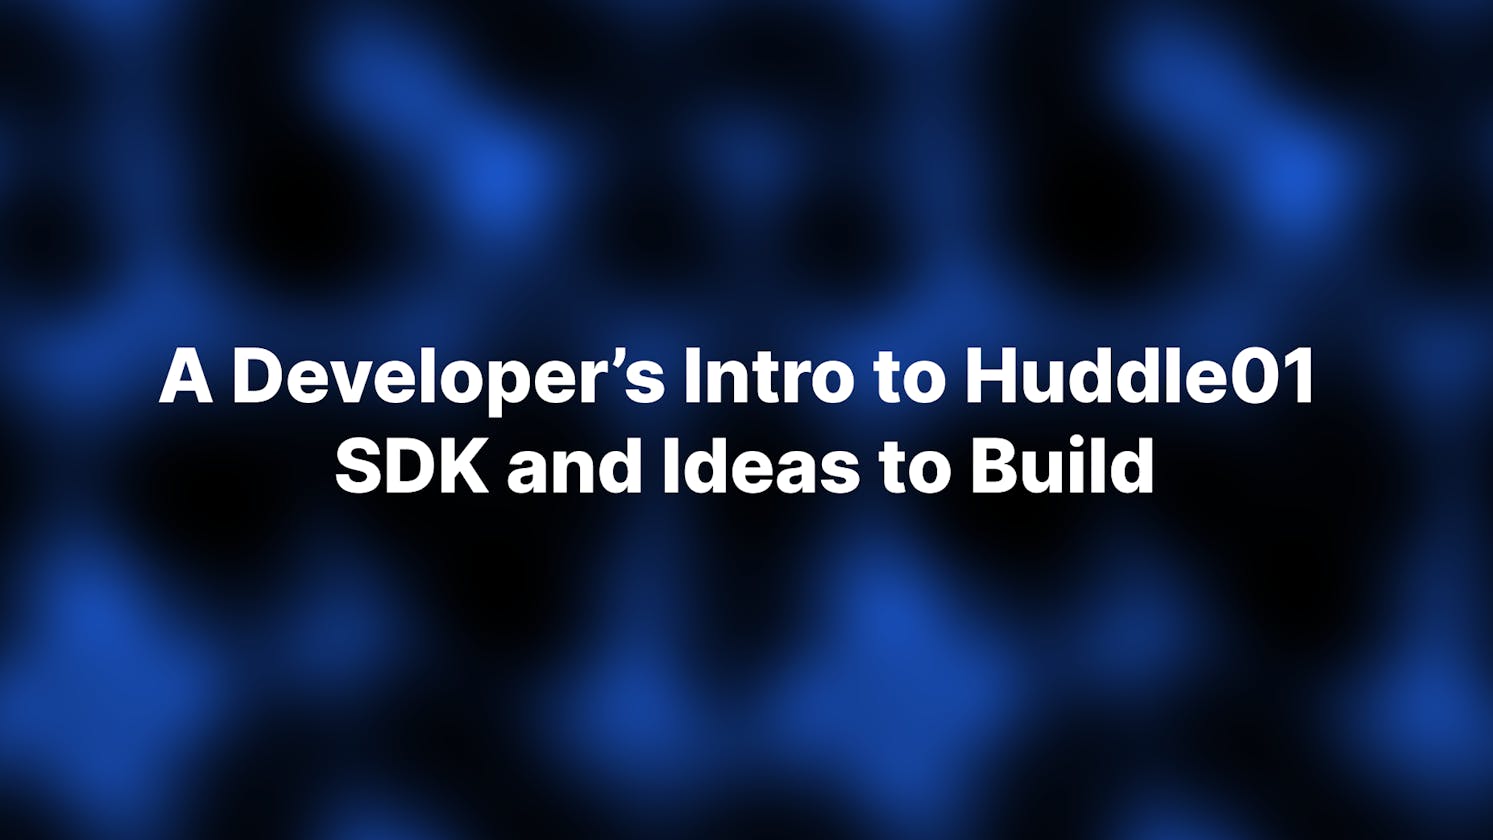 A Developer’s Intro to Huddle01 SDK and Ideas to Build.